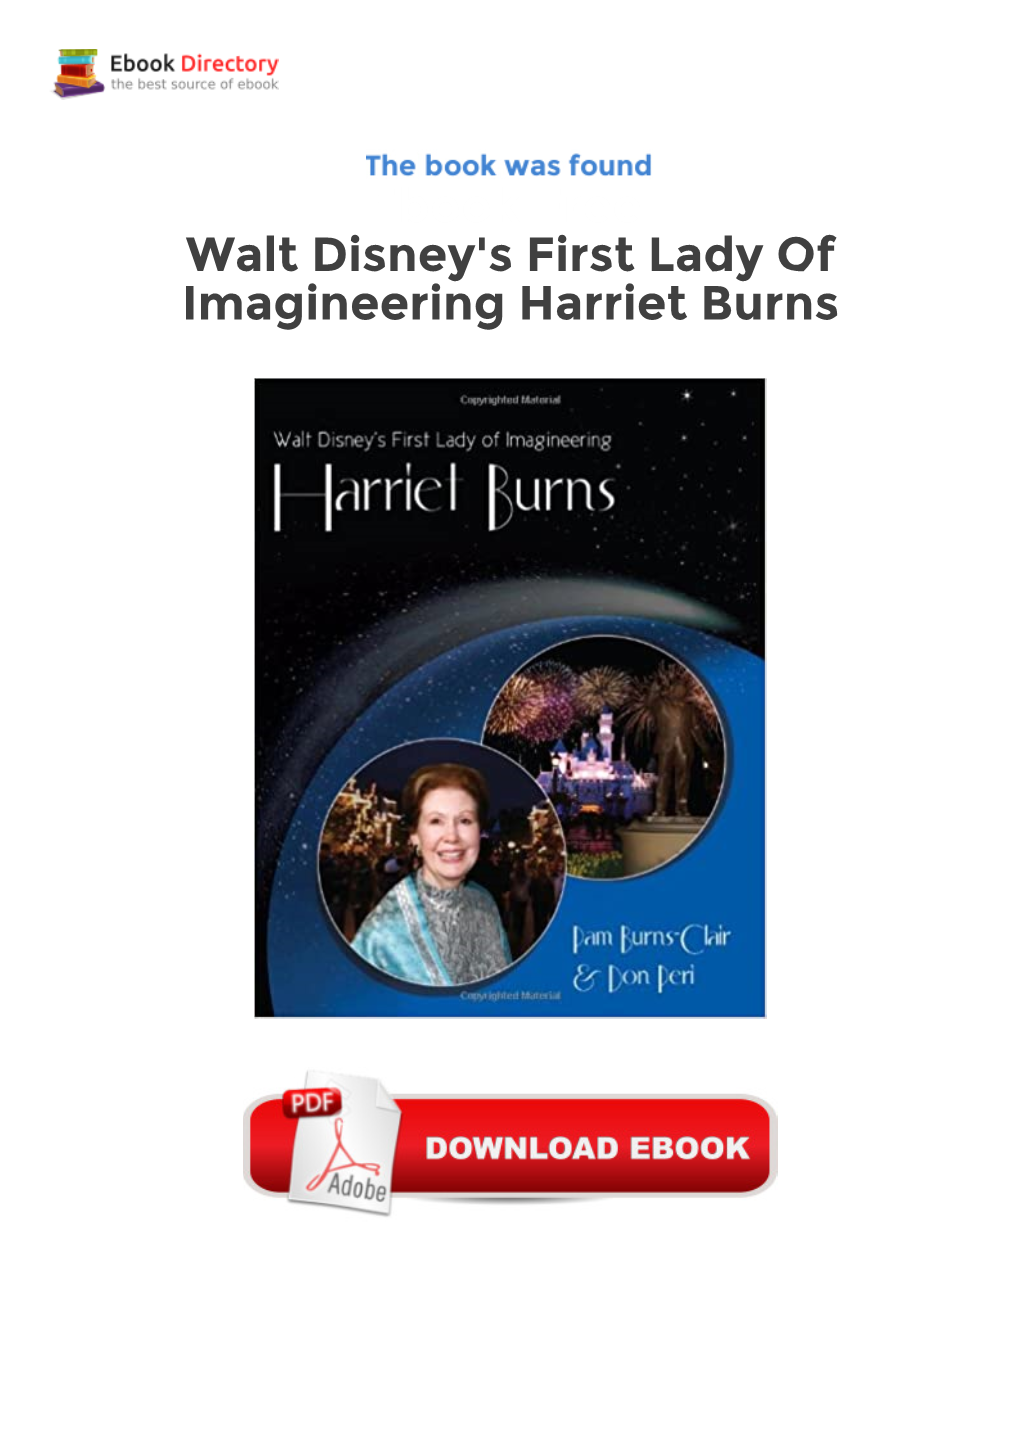 Ebook Free Walt Disney's First Lady of Imagineering Harriet Burns Limited-Edition, Hardcover Book with 112 Pages and Over 150 Photos